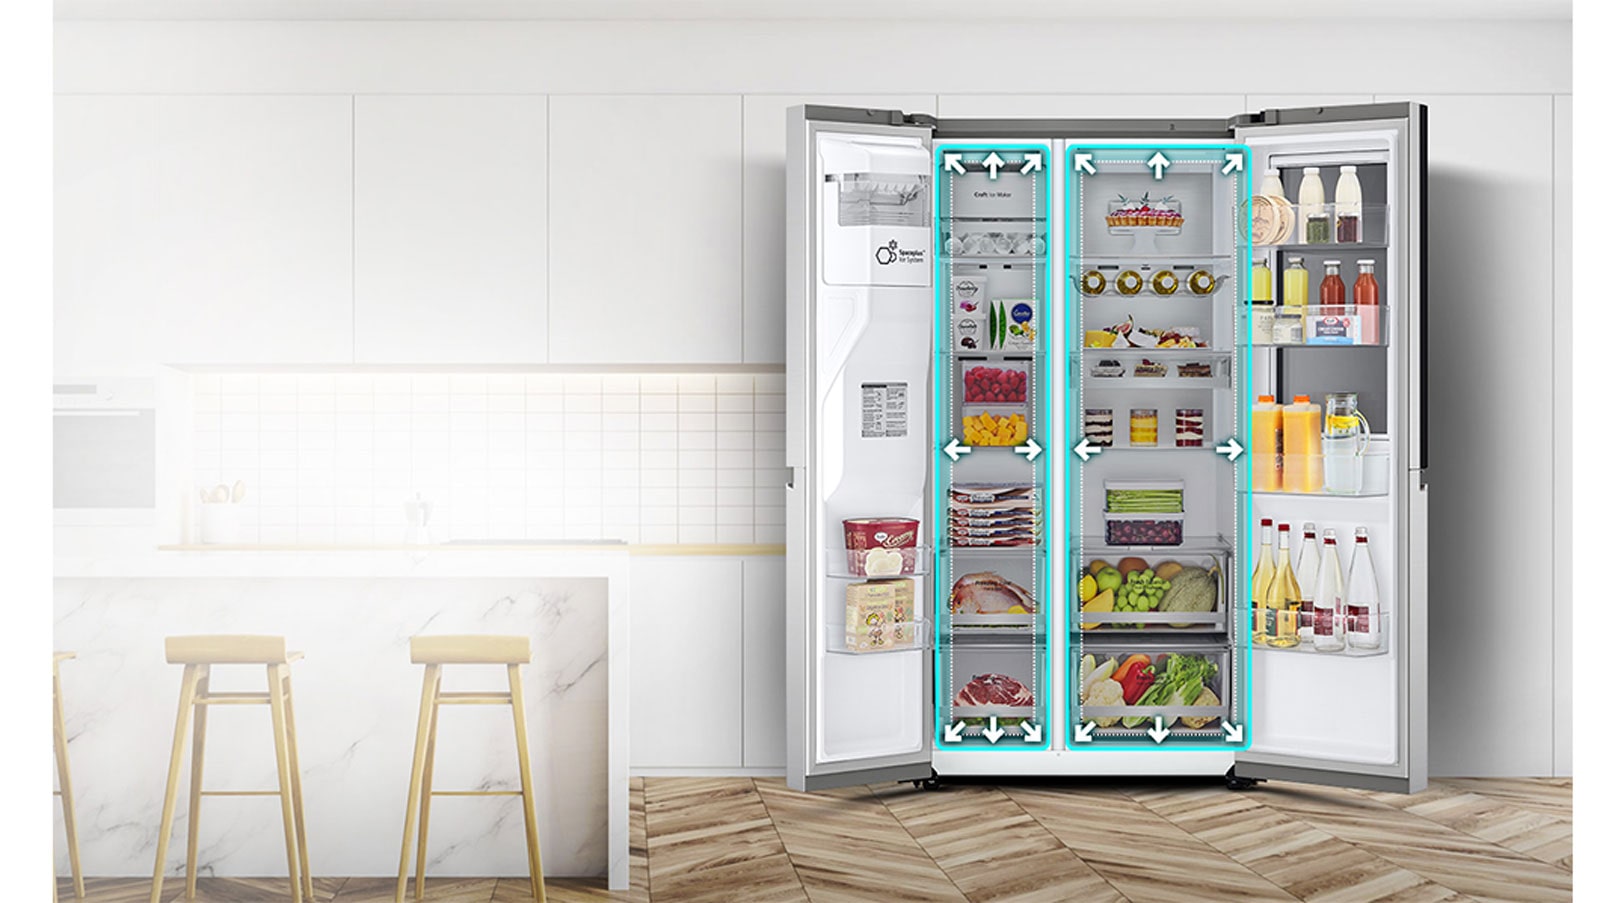 A video begins with the front view of the refrigerator with both doors open. The interior spaces are outlined with neon lines and arrows begin to push the lines to show that there is now more space inside. The neon square around the interior spaces flashes to show the difference between the new space and the old smaller space that now stands out in a dotted white line.